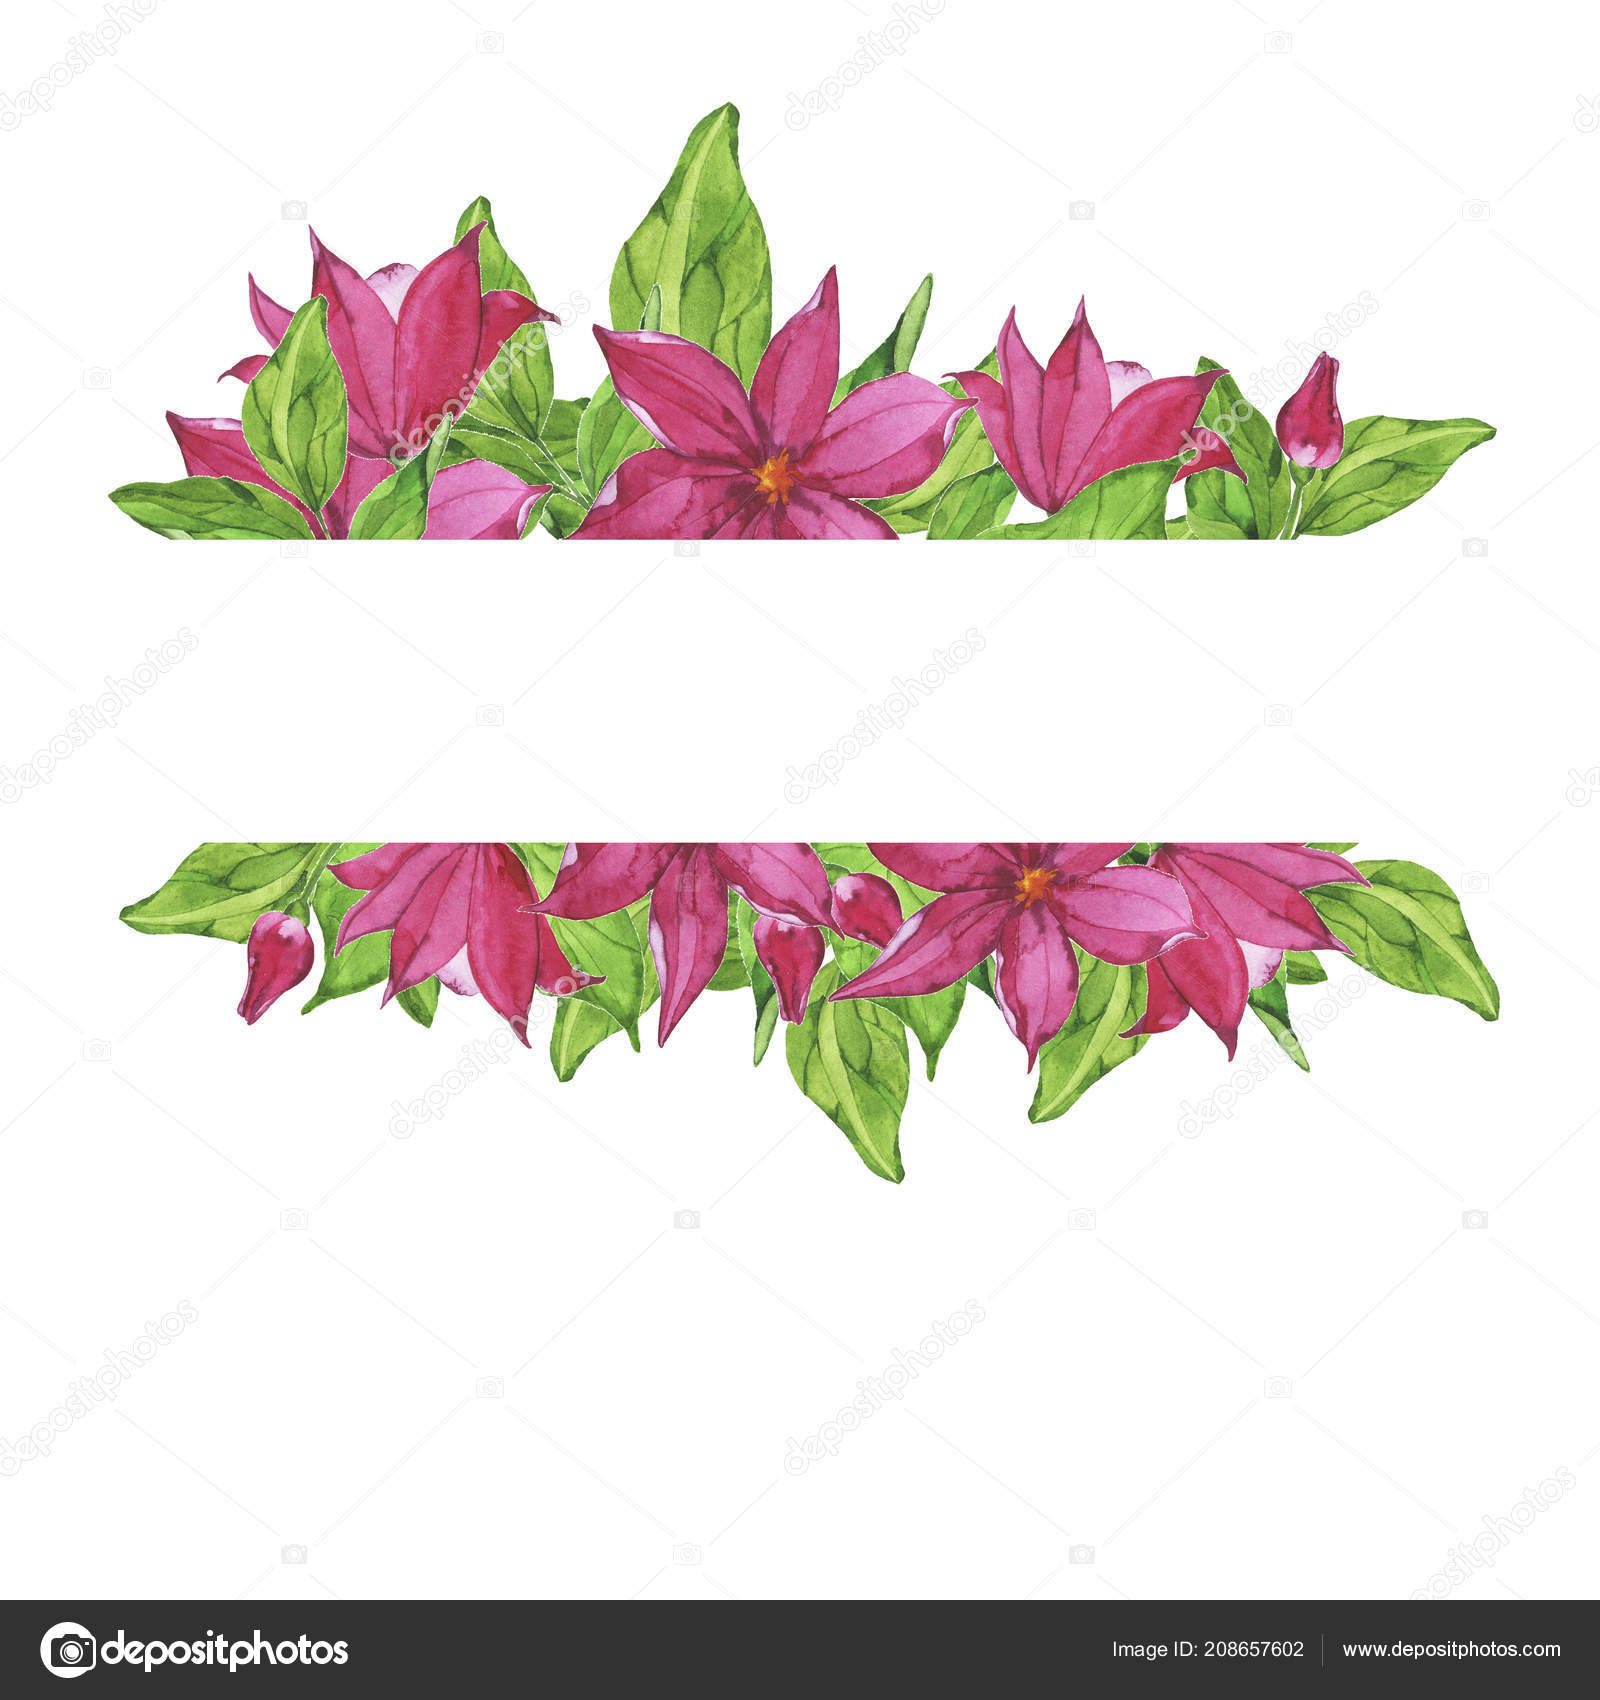 Green Leaves Pink Flowers Border Isolated White Background Hand Drawn Stock Photo C Angry Red Cat 208657602